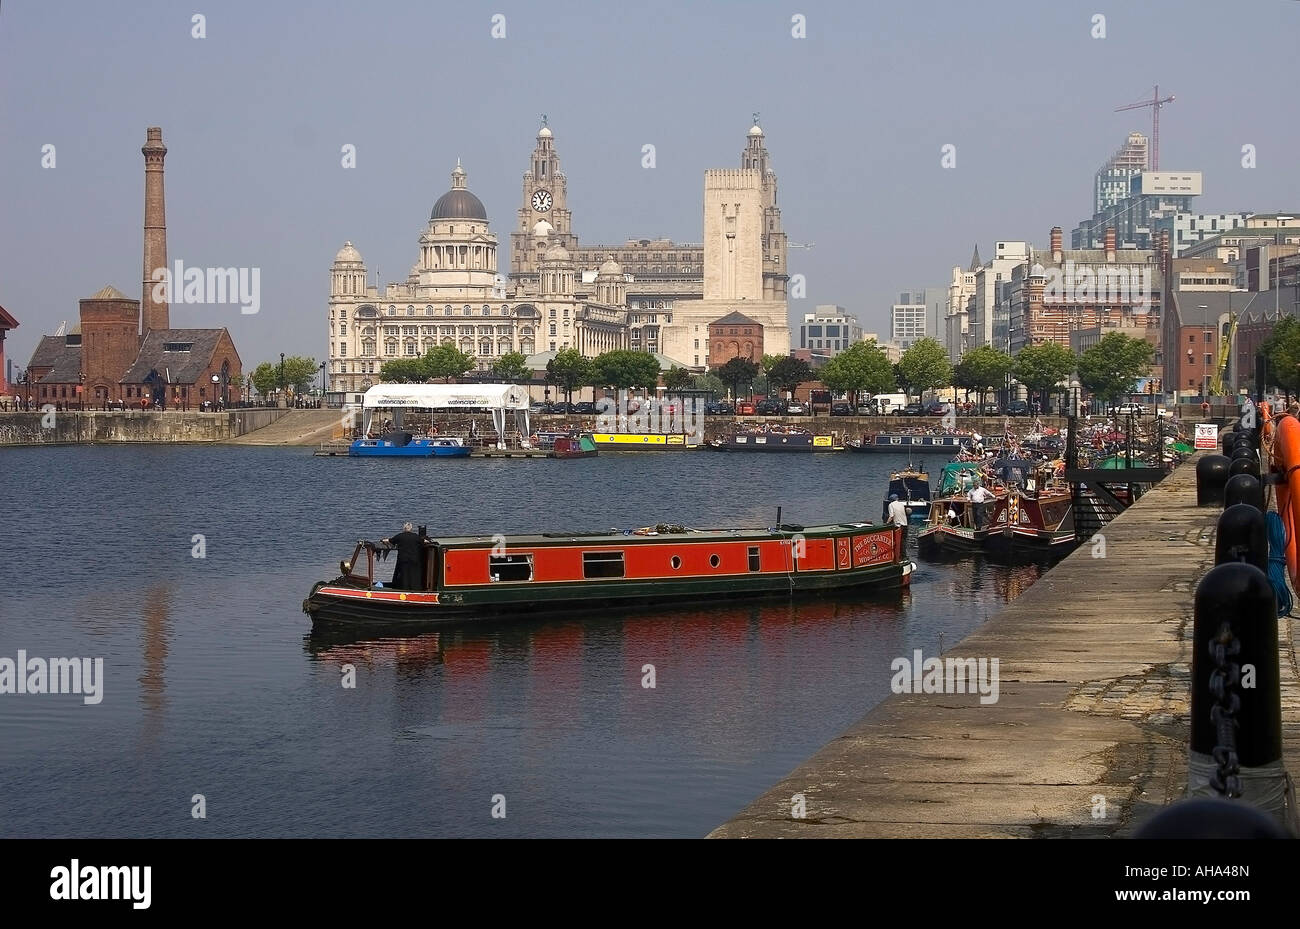 MERSEY,RIVER,FESTIVAL,2007,NARROW,BOATS,IN SALTHOUSE DOCK,LIVERPOOL,LIVER BUILDING,CLOCK,MERSEY DOCK AND HARBOUR CO, COMPANY. Stock Photo